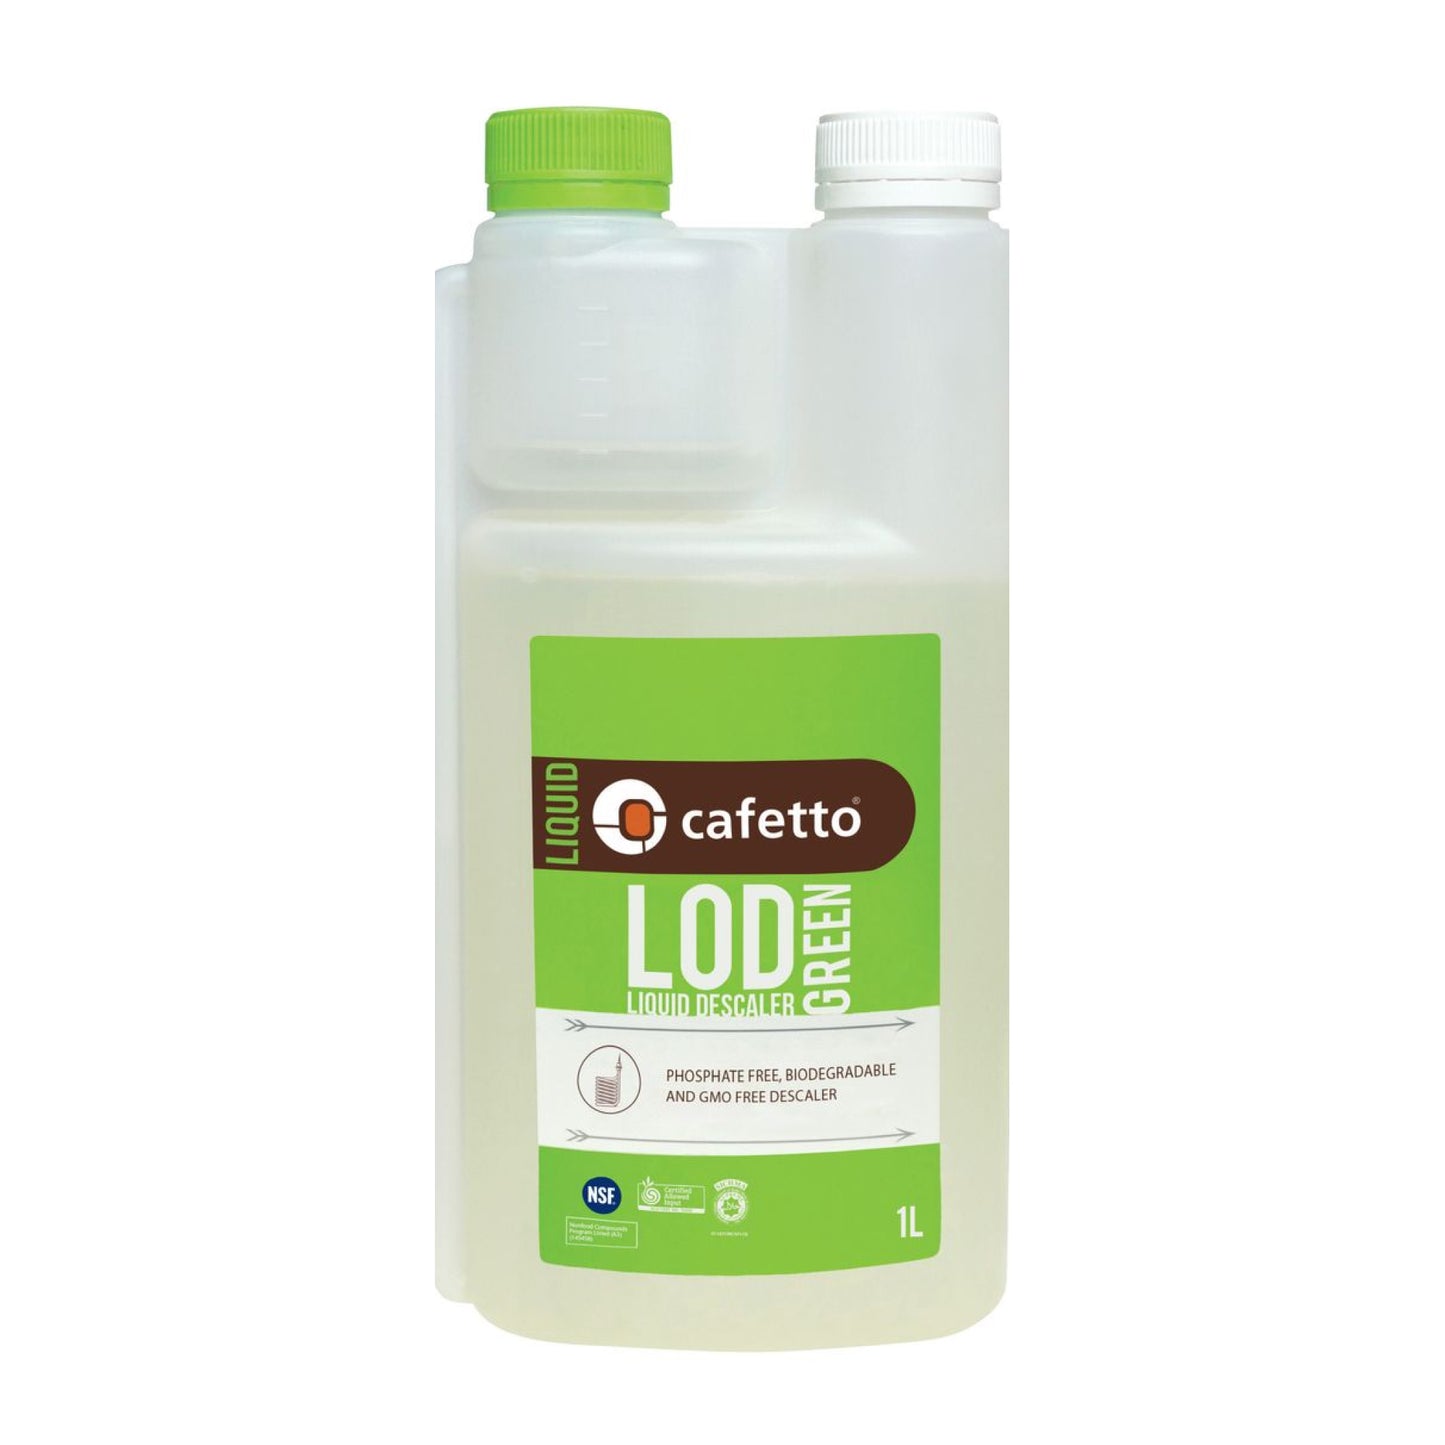 Cafetto LOD Green coffee machine cleaner